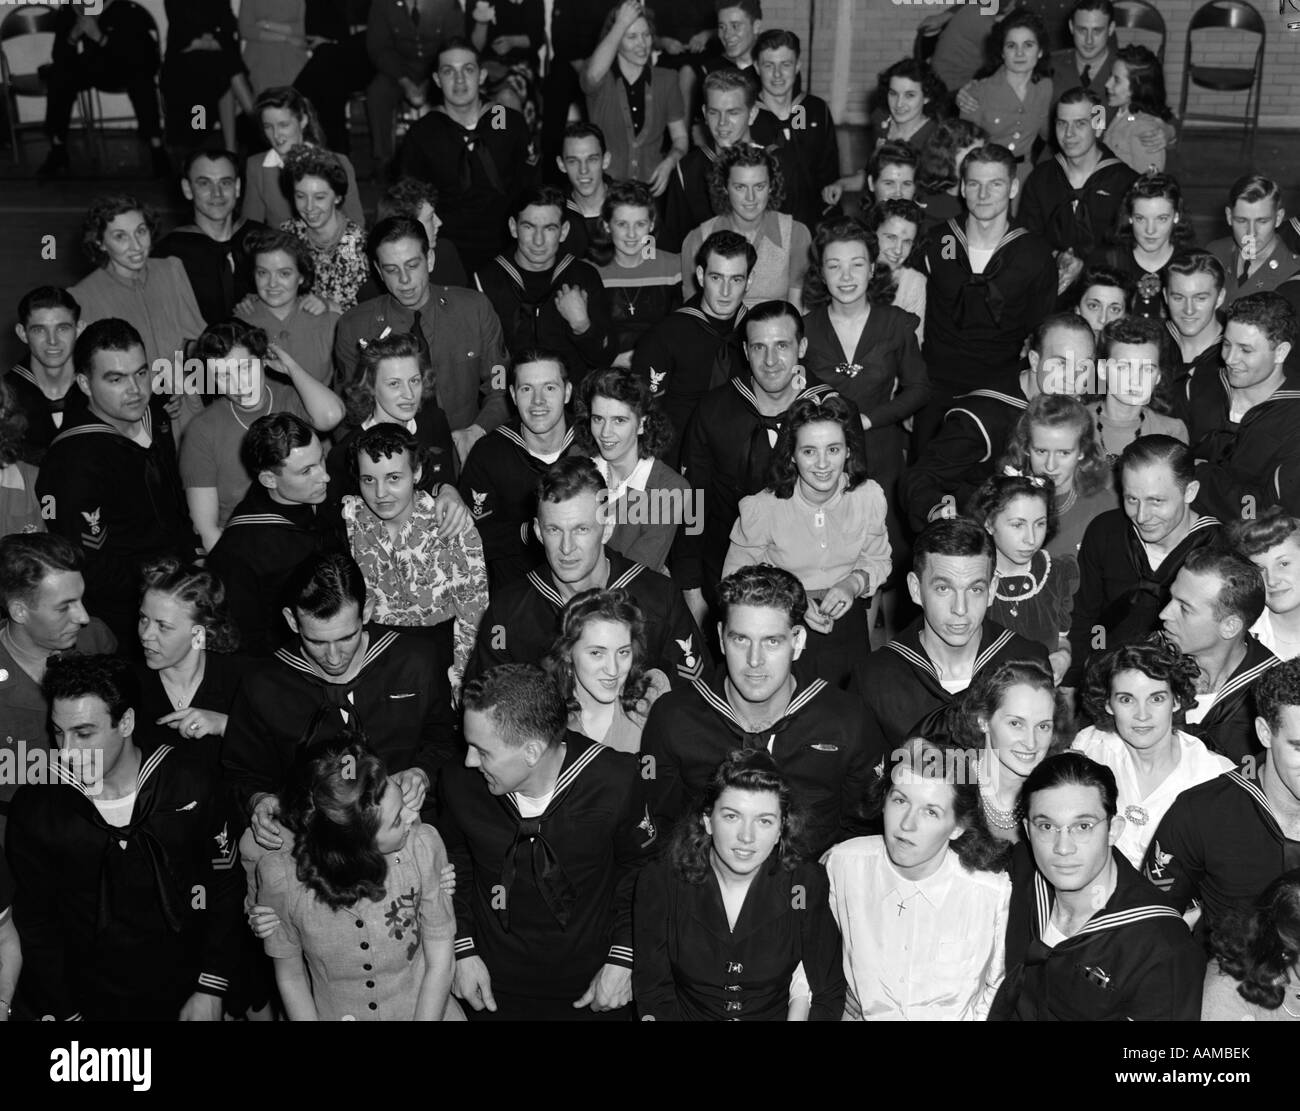 1940s CROWD MEN WOMEN CIVILIANS SOLDIERS SAILORS LOOKING UP SMILING AT CAMERA USO CENTER Stock Photo